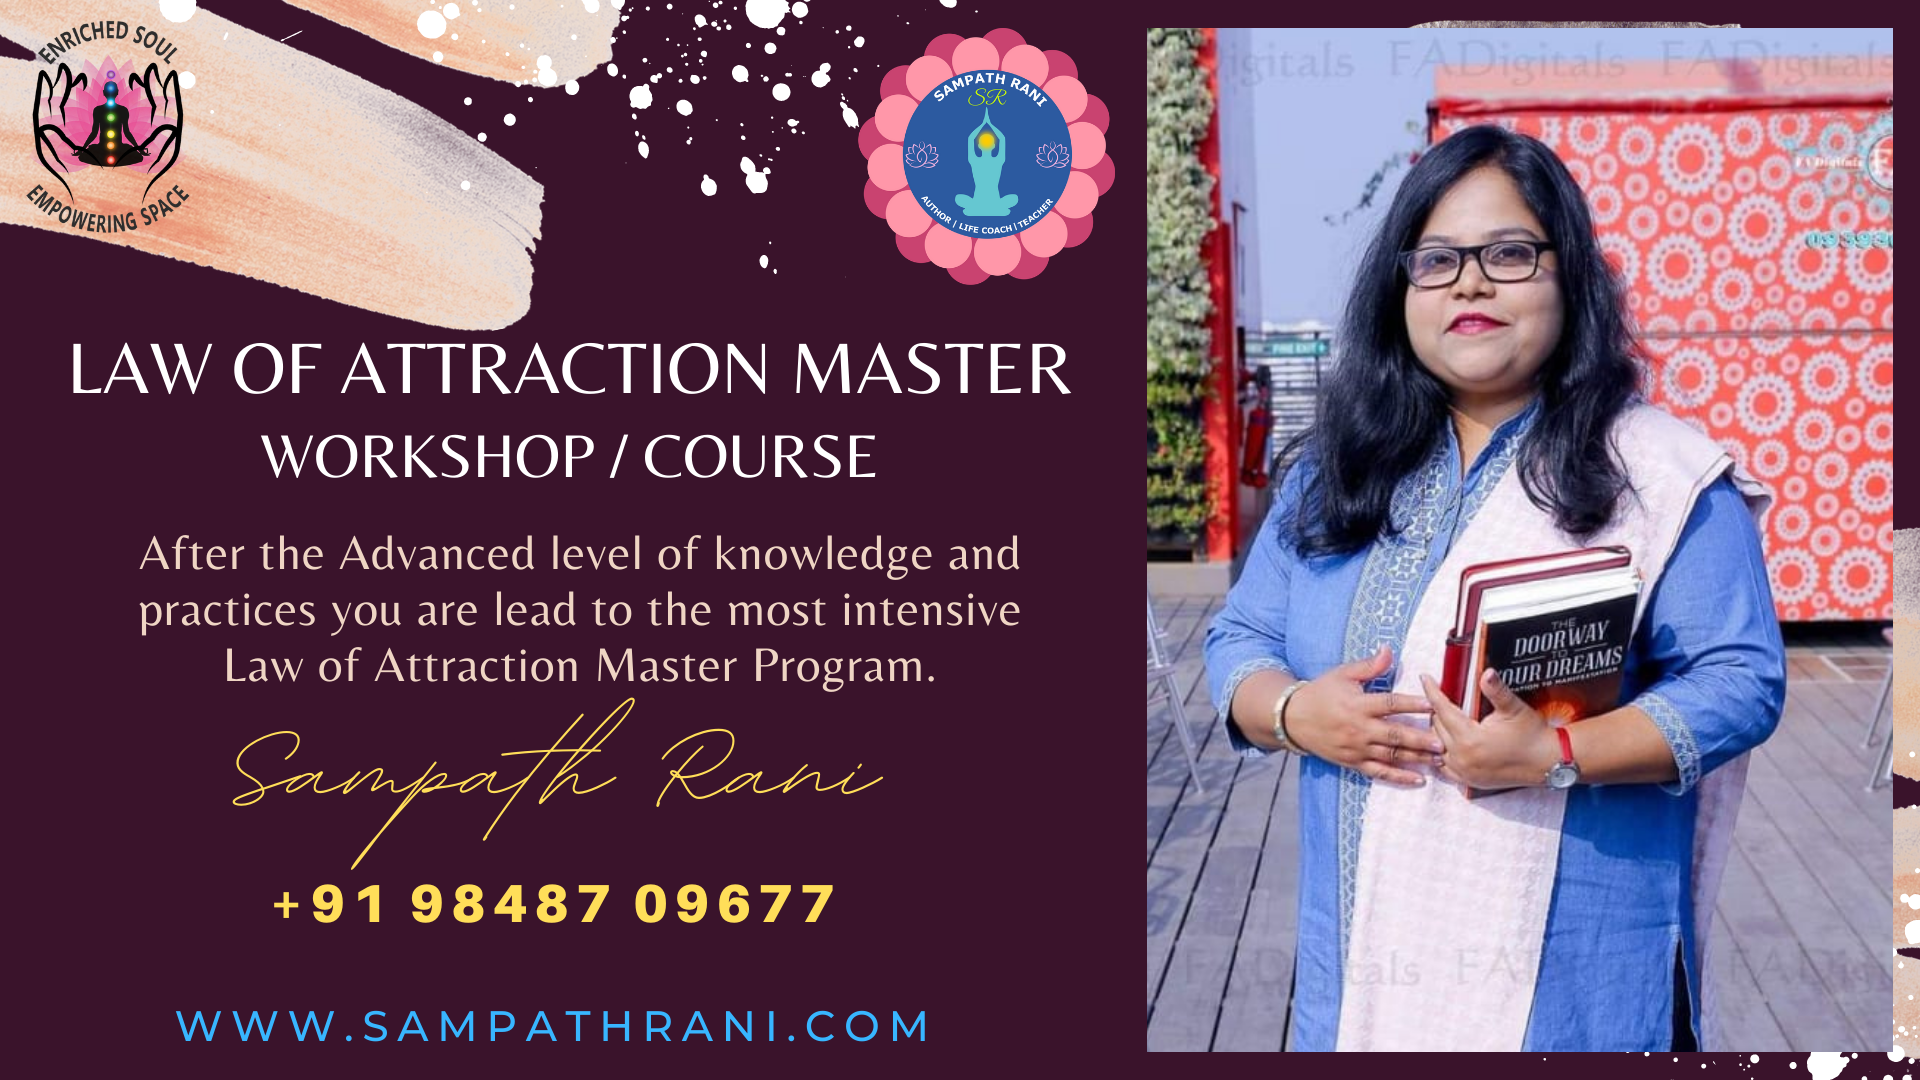 Law of Attraction Master Workshop, Course - by Sampath Rani - Nizamabad